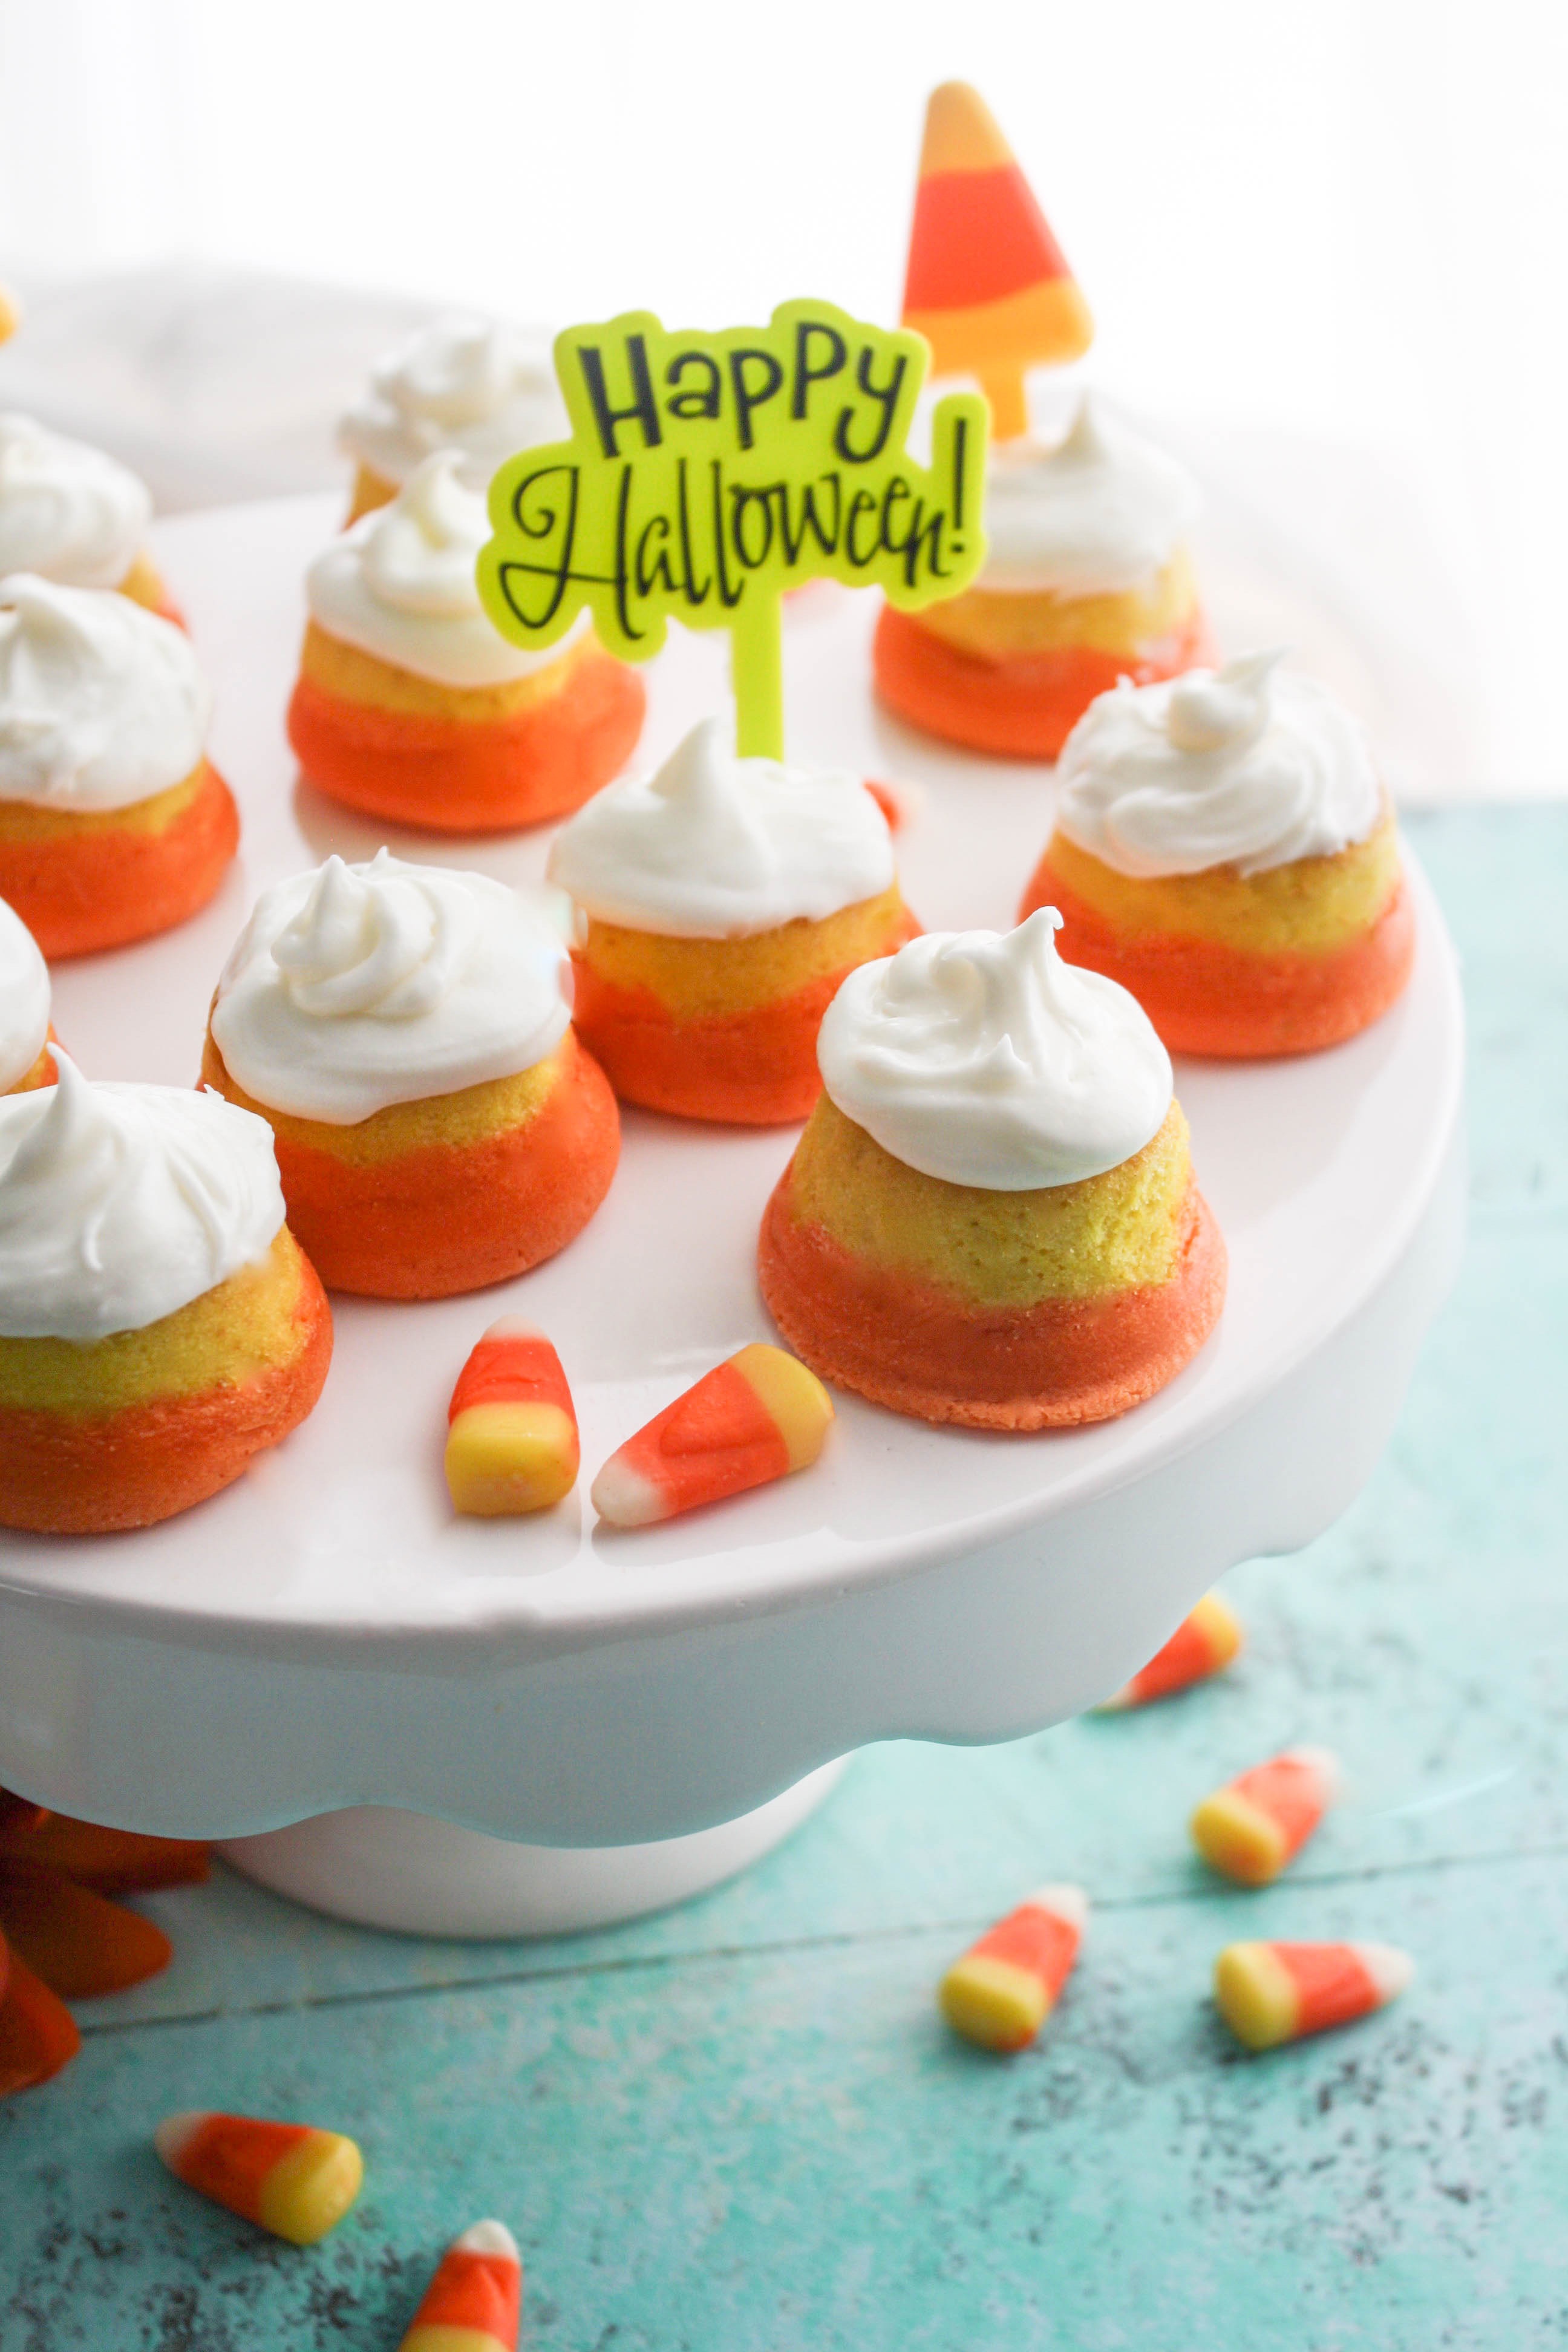 Mini “Candy Corn” Cupcakes with Buttercream Frosting make the perfect Halloween dessert! These mini cupcakes are fabulous for the Halloween festivities!